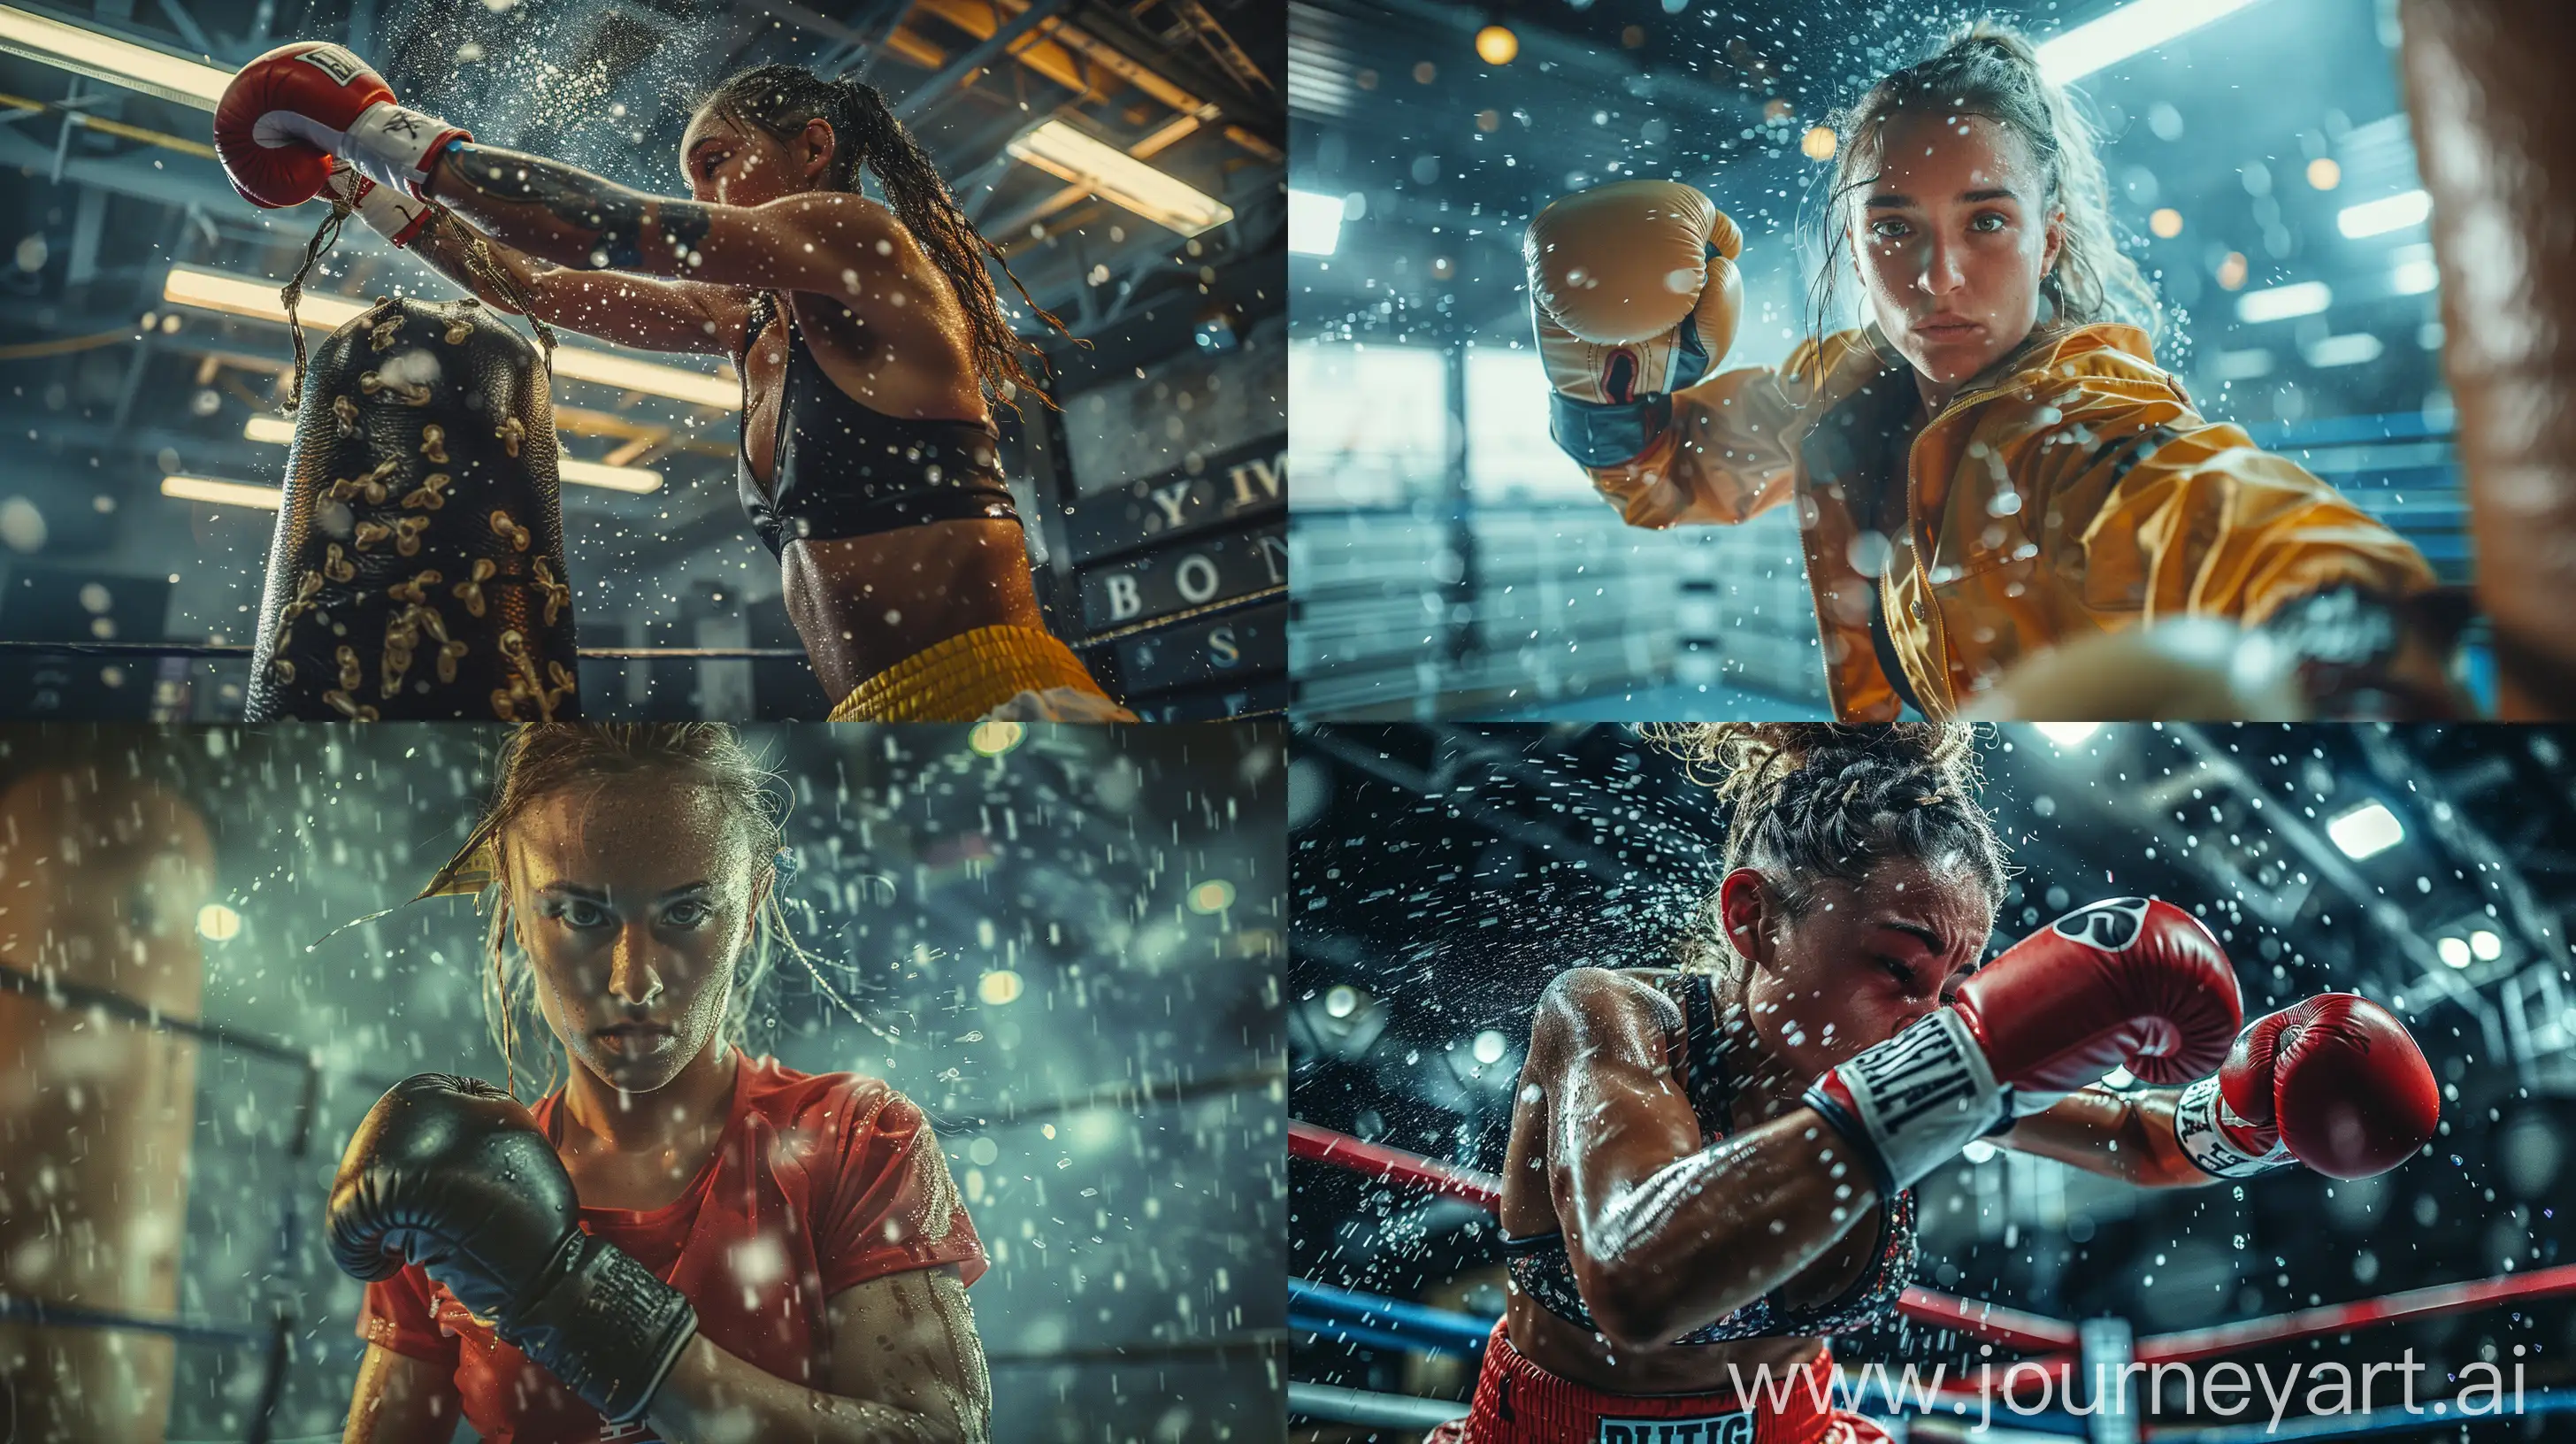 Boxer girl journey from training to championship, dynamic collage of action shots, punching bag, sparring, sweat, determination, victorious raise of the belt, urban gym background, photojournalistic style, raw emotion, empowering, cinematic montage --ar 16:9 --s 300 --v 6 --c 10